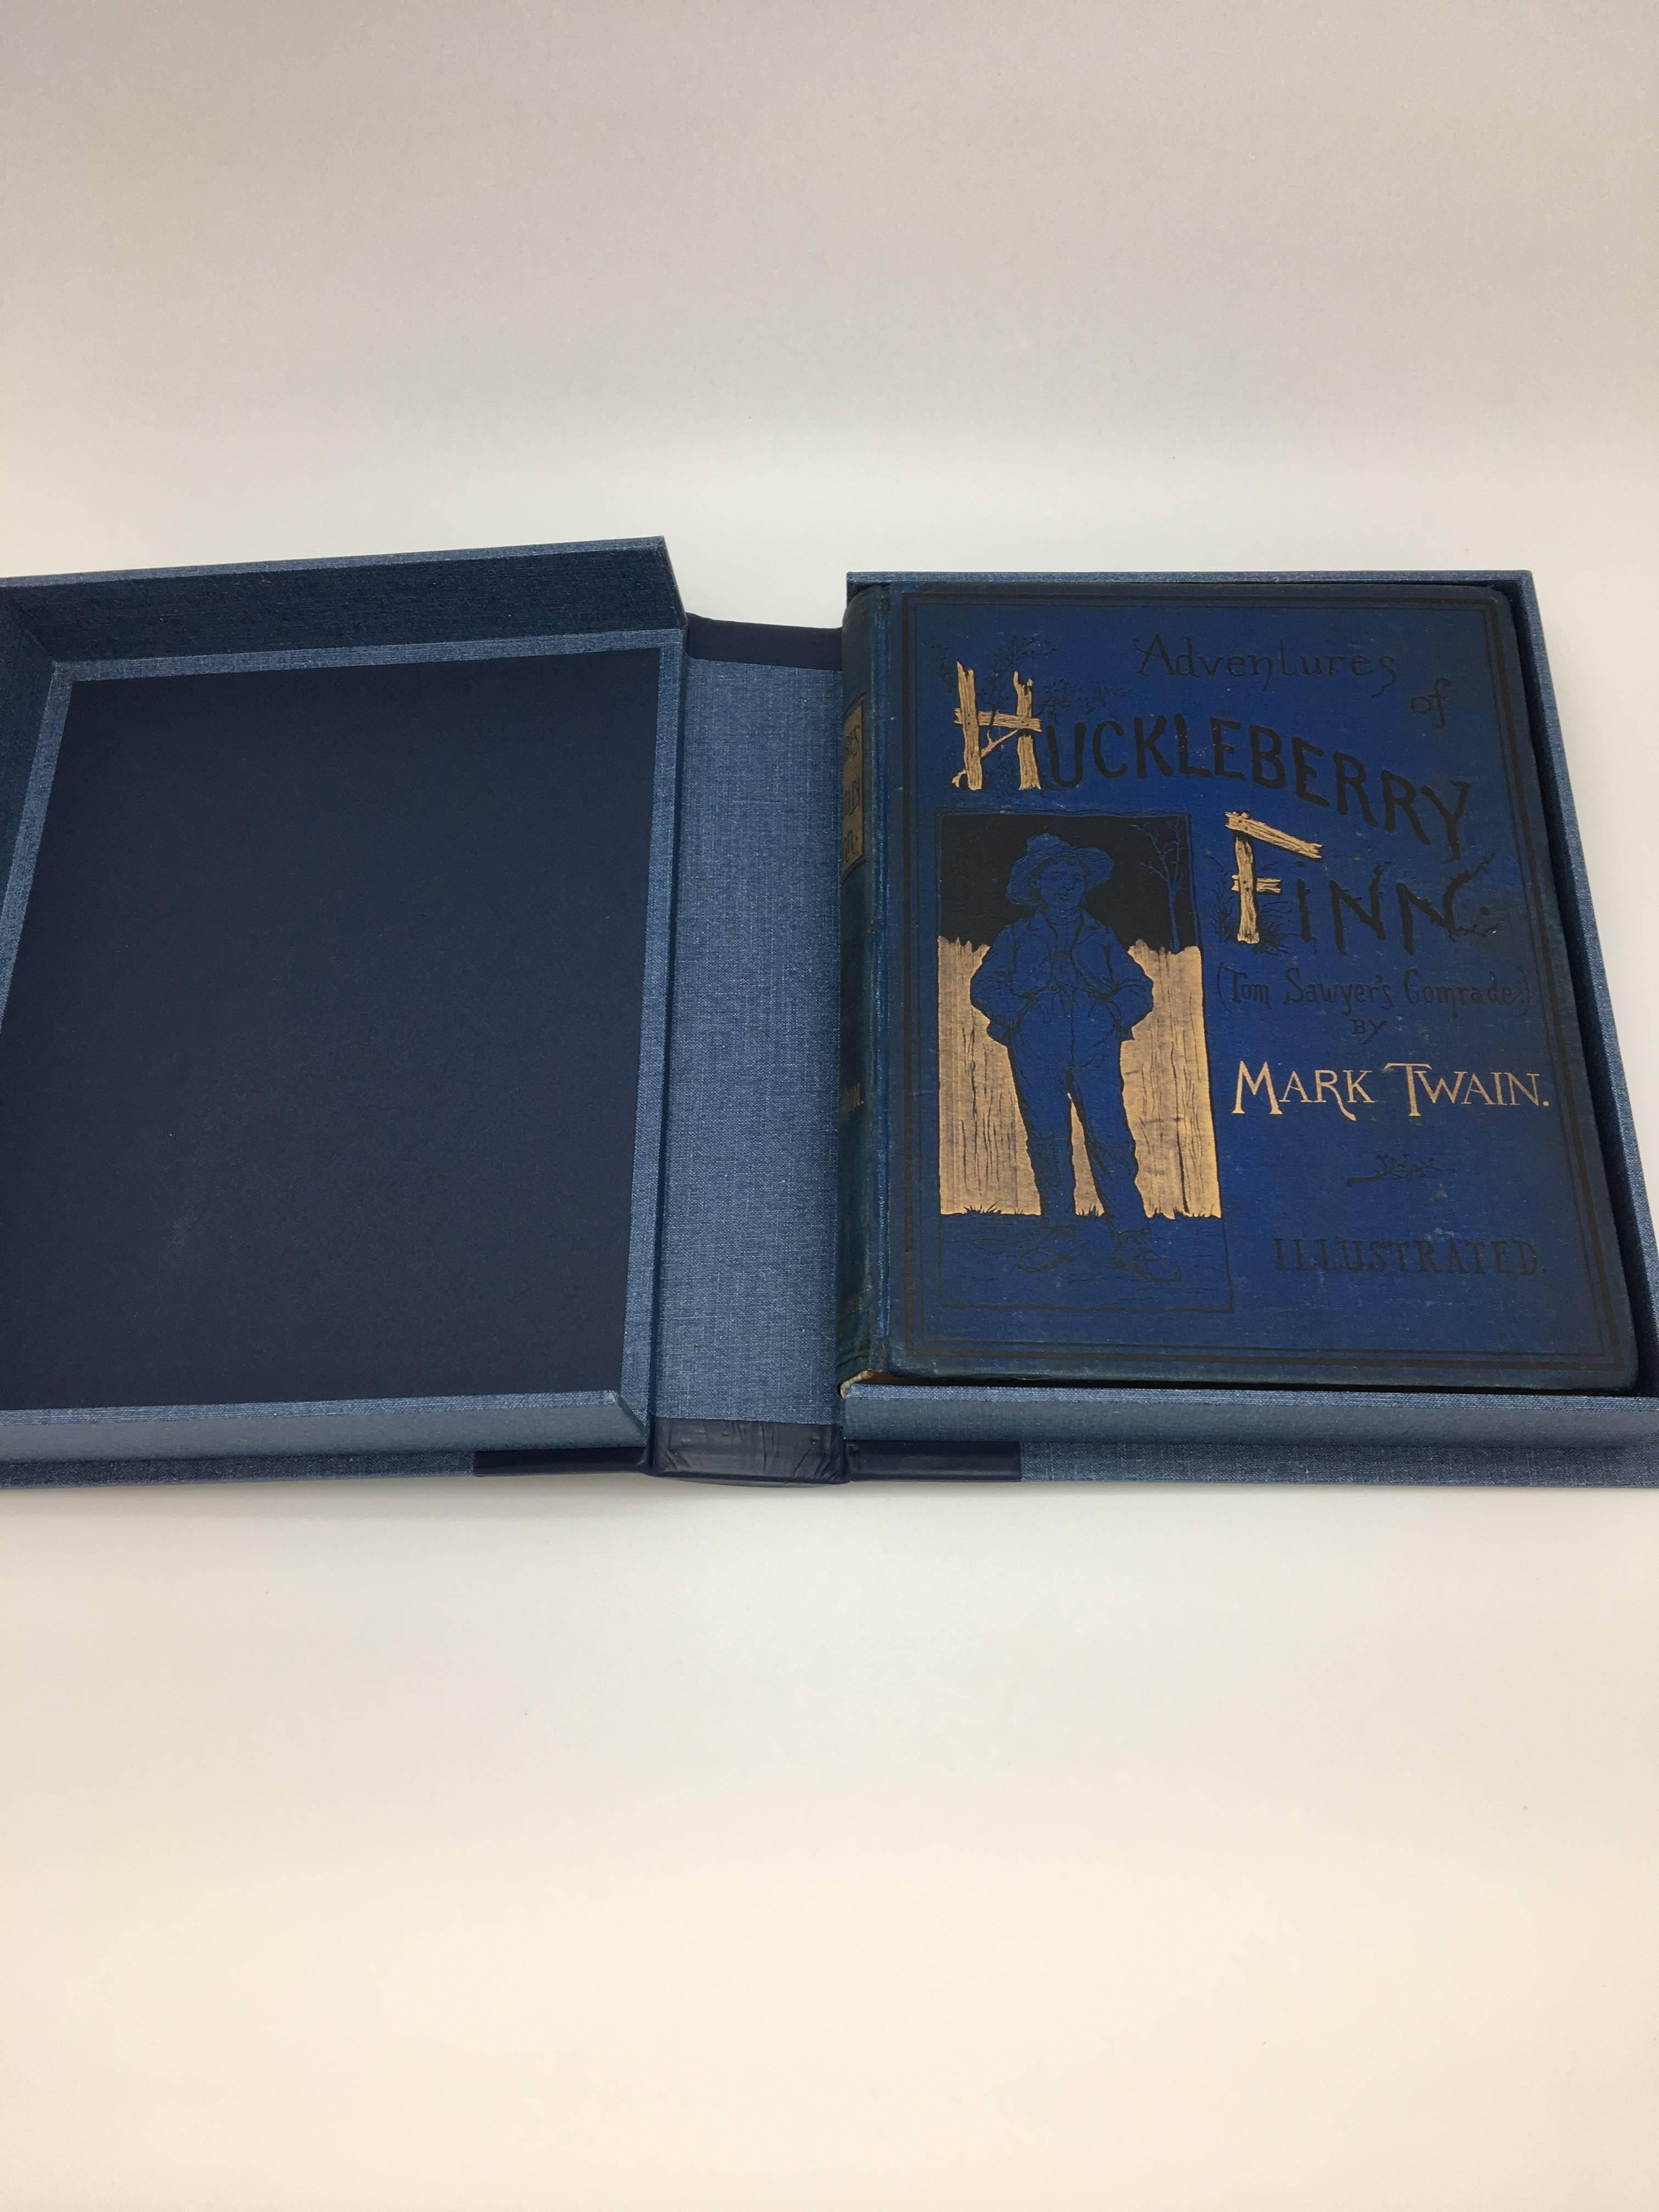 Twain, Mark. Adventures of Huckleberry Finn (Tom Sawyer’s Comrade). New York: Charles L. Webster, 1885. Octavo, original gilt and black stamped blue pictorial cloth. Housed in a custom handcrafted clam-shell box.

Rare first edition, first issue,